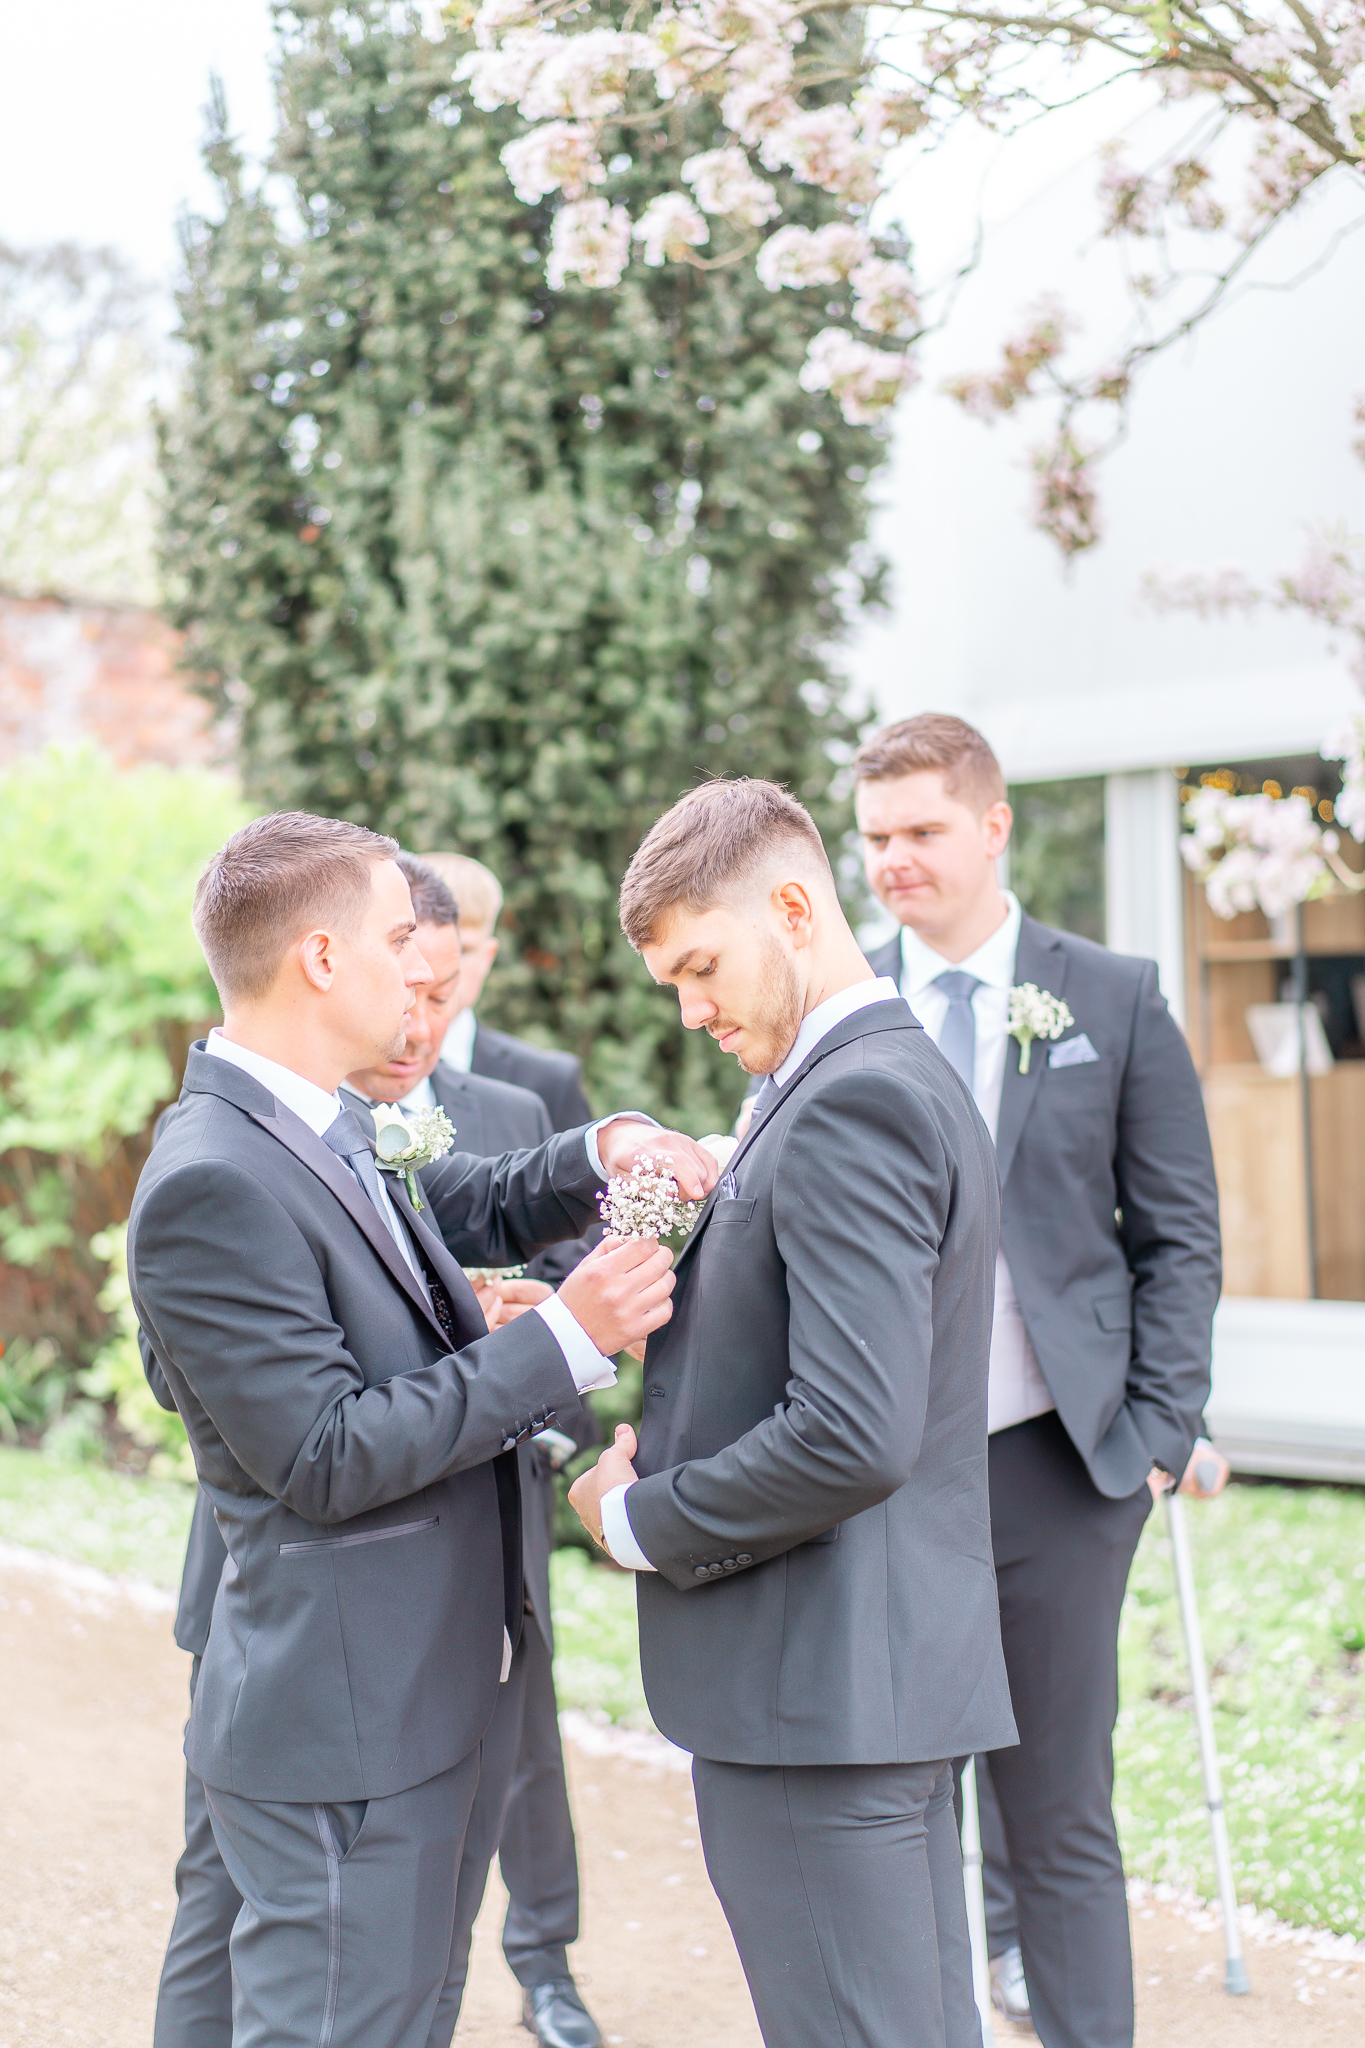 Candid moment of Spencer putting his groomsmen's buttonholes on at Combermere Abbey 